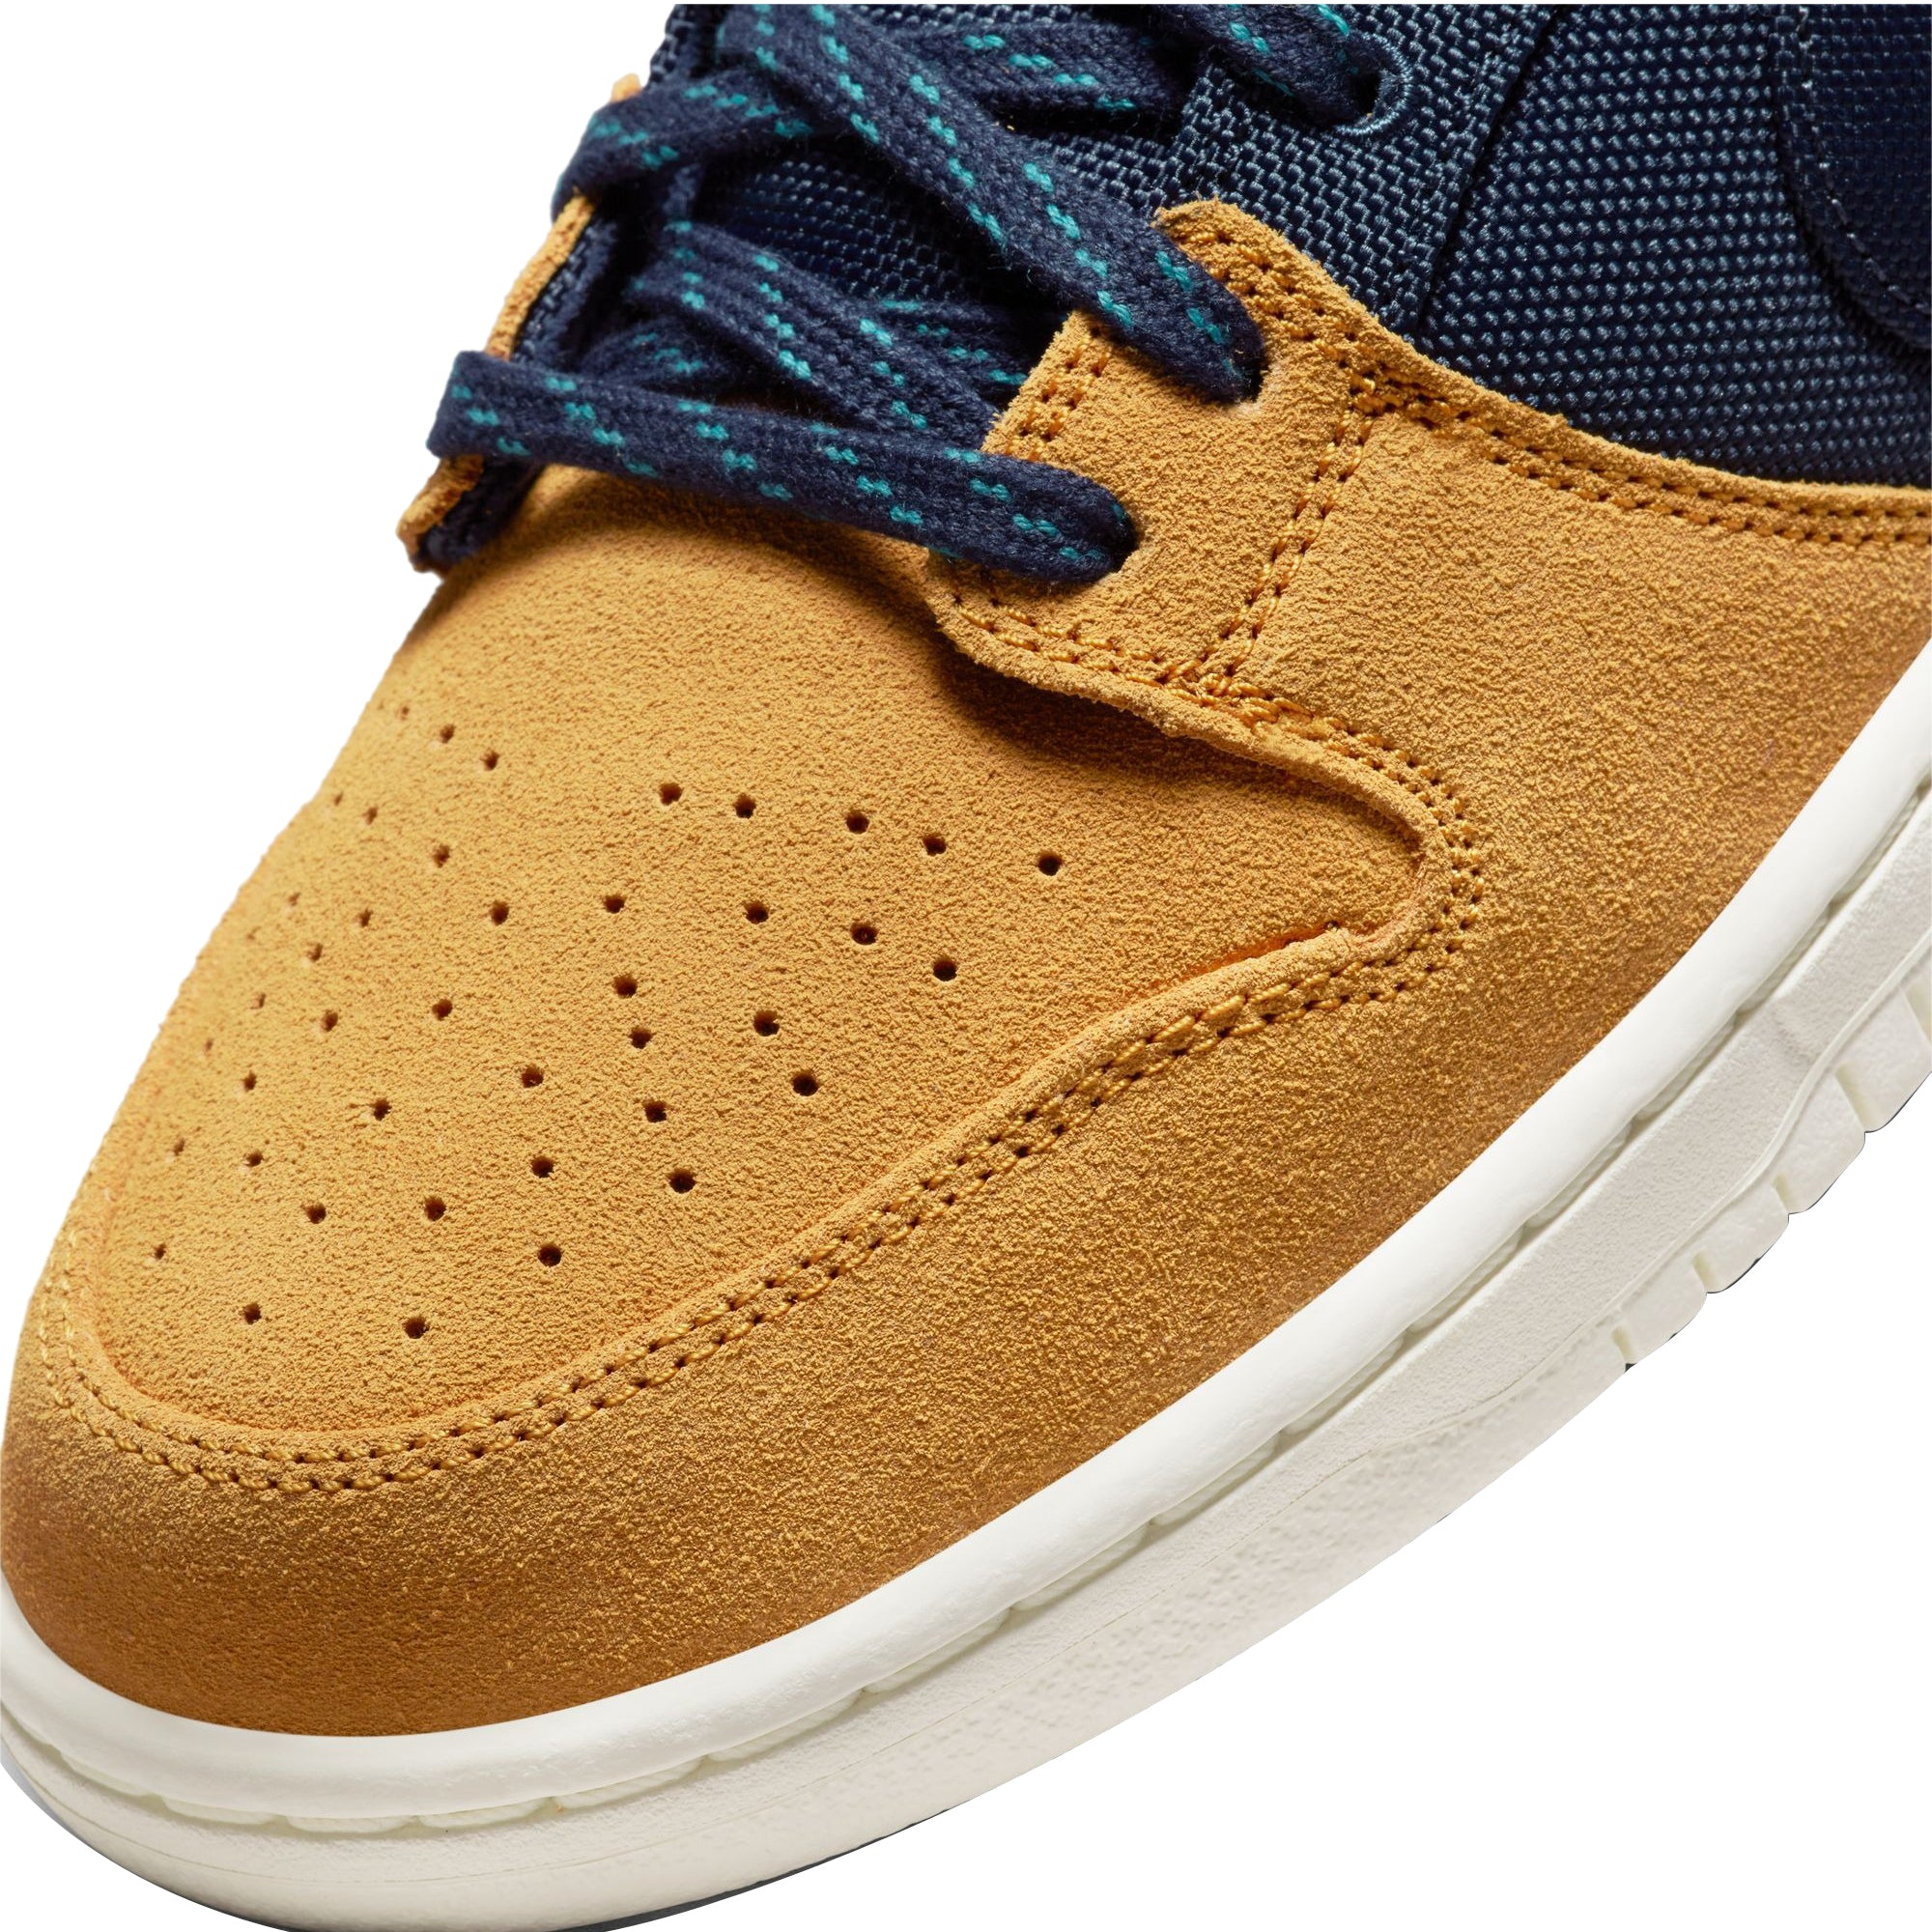 Nike SB Mens Dunk Low Pro PRM Shoes – Extra Butter